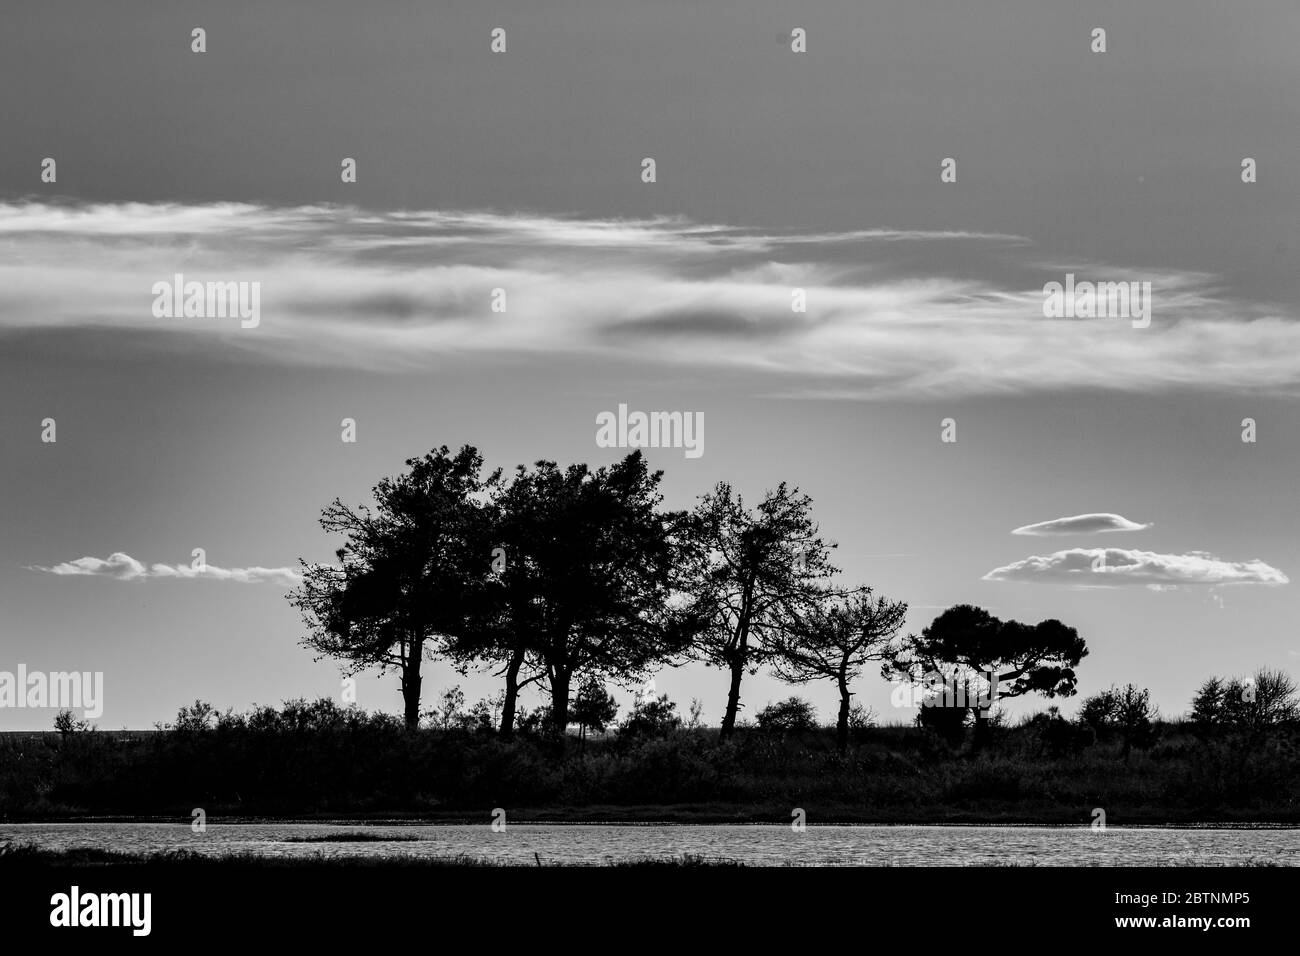 Black and white photo of silhouettes of six pine trees near the beach of Fanari village, Xanthi region of Northern Greece, late autumn afternoon. Scenery cloudy windy sky Stock Photo